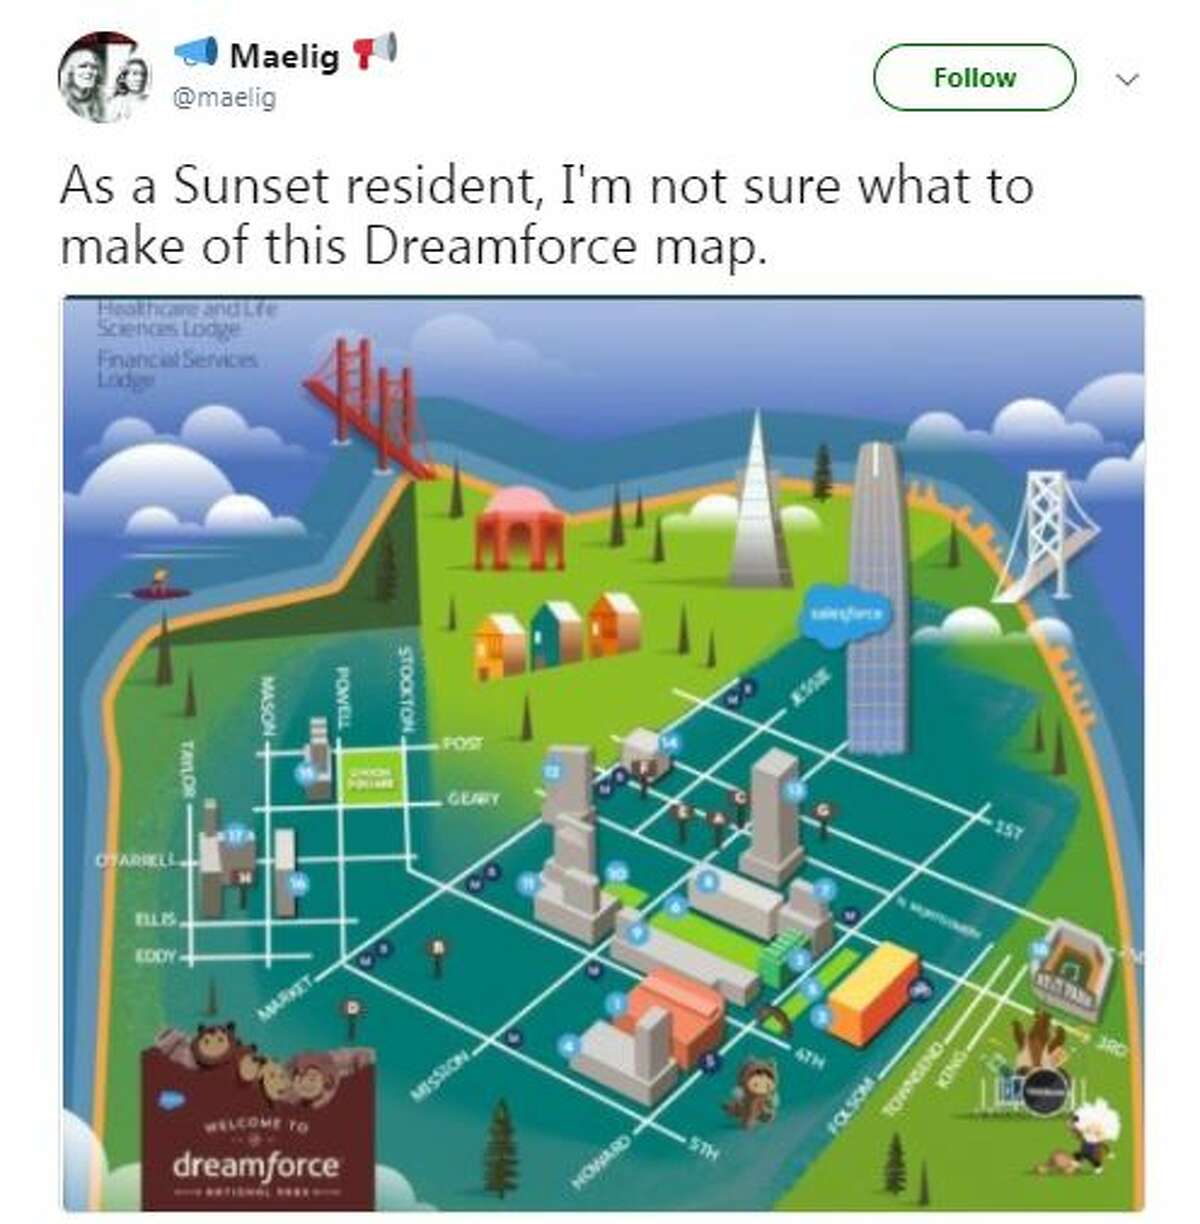 Twitter users had some things to say about this Dreamforce map of San Francisco. 